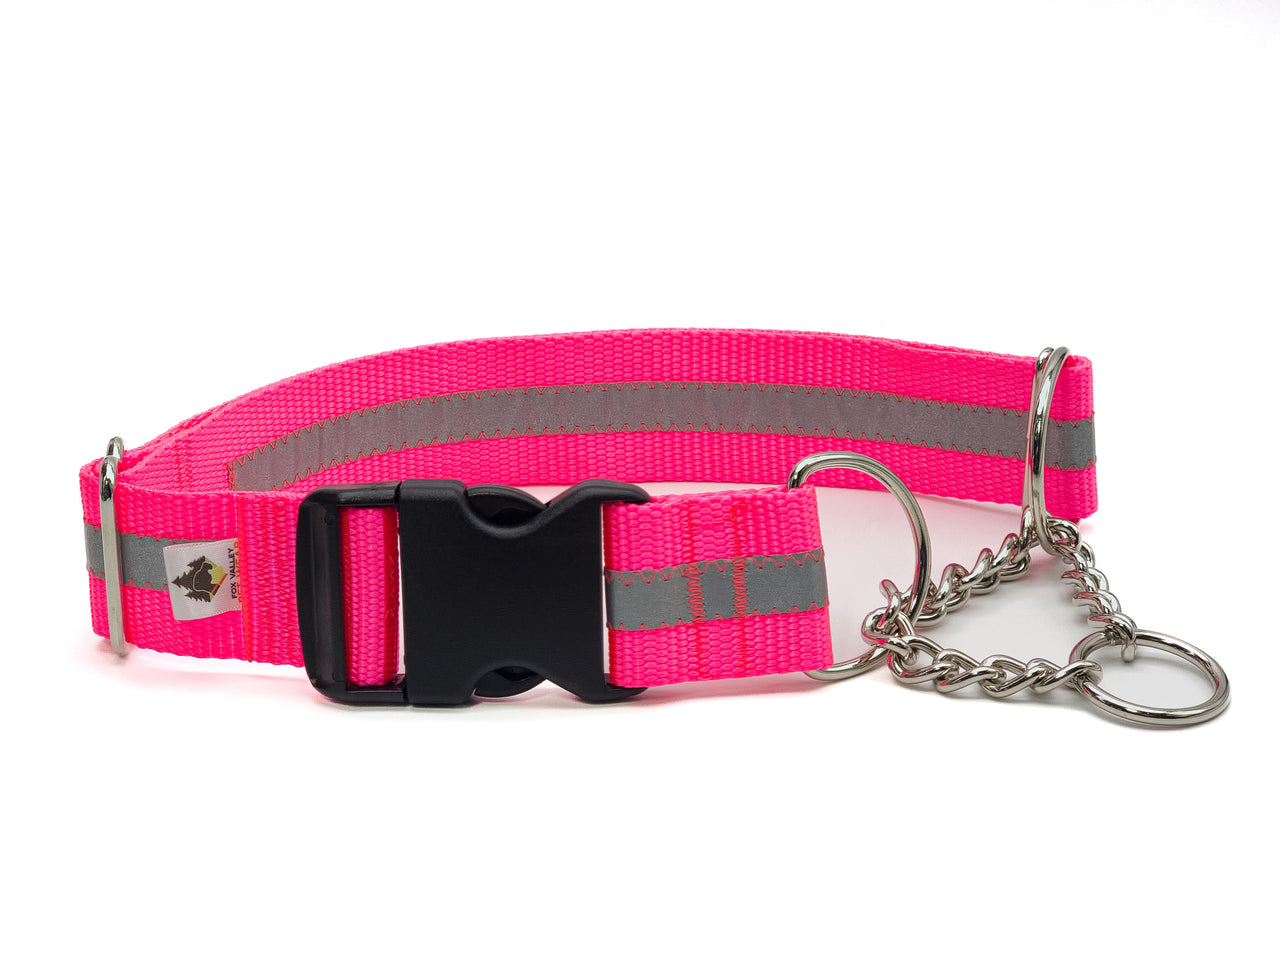 Chain Martingale | Quick clip buckle | XL reflective in 1.5" wide